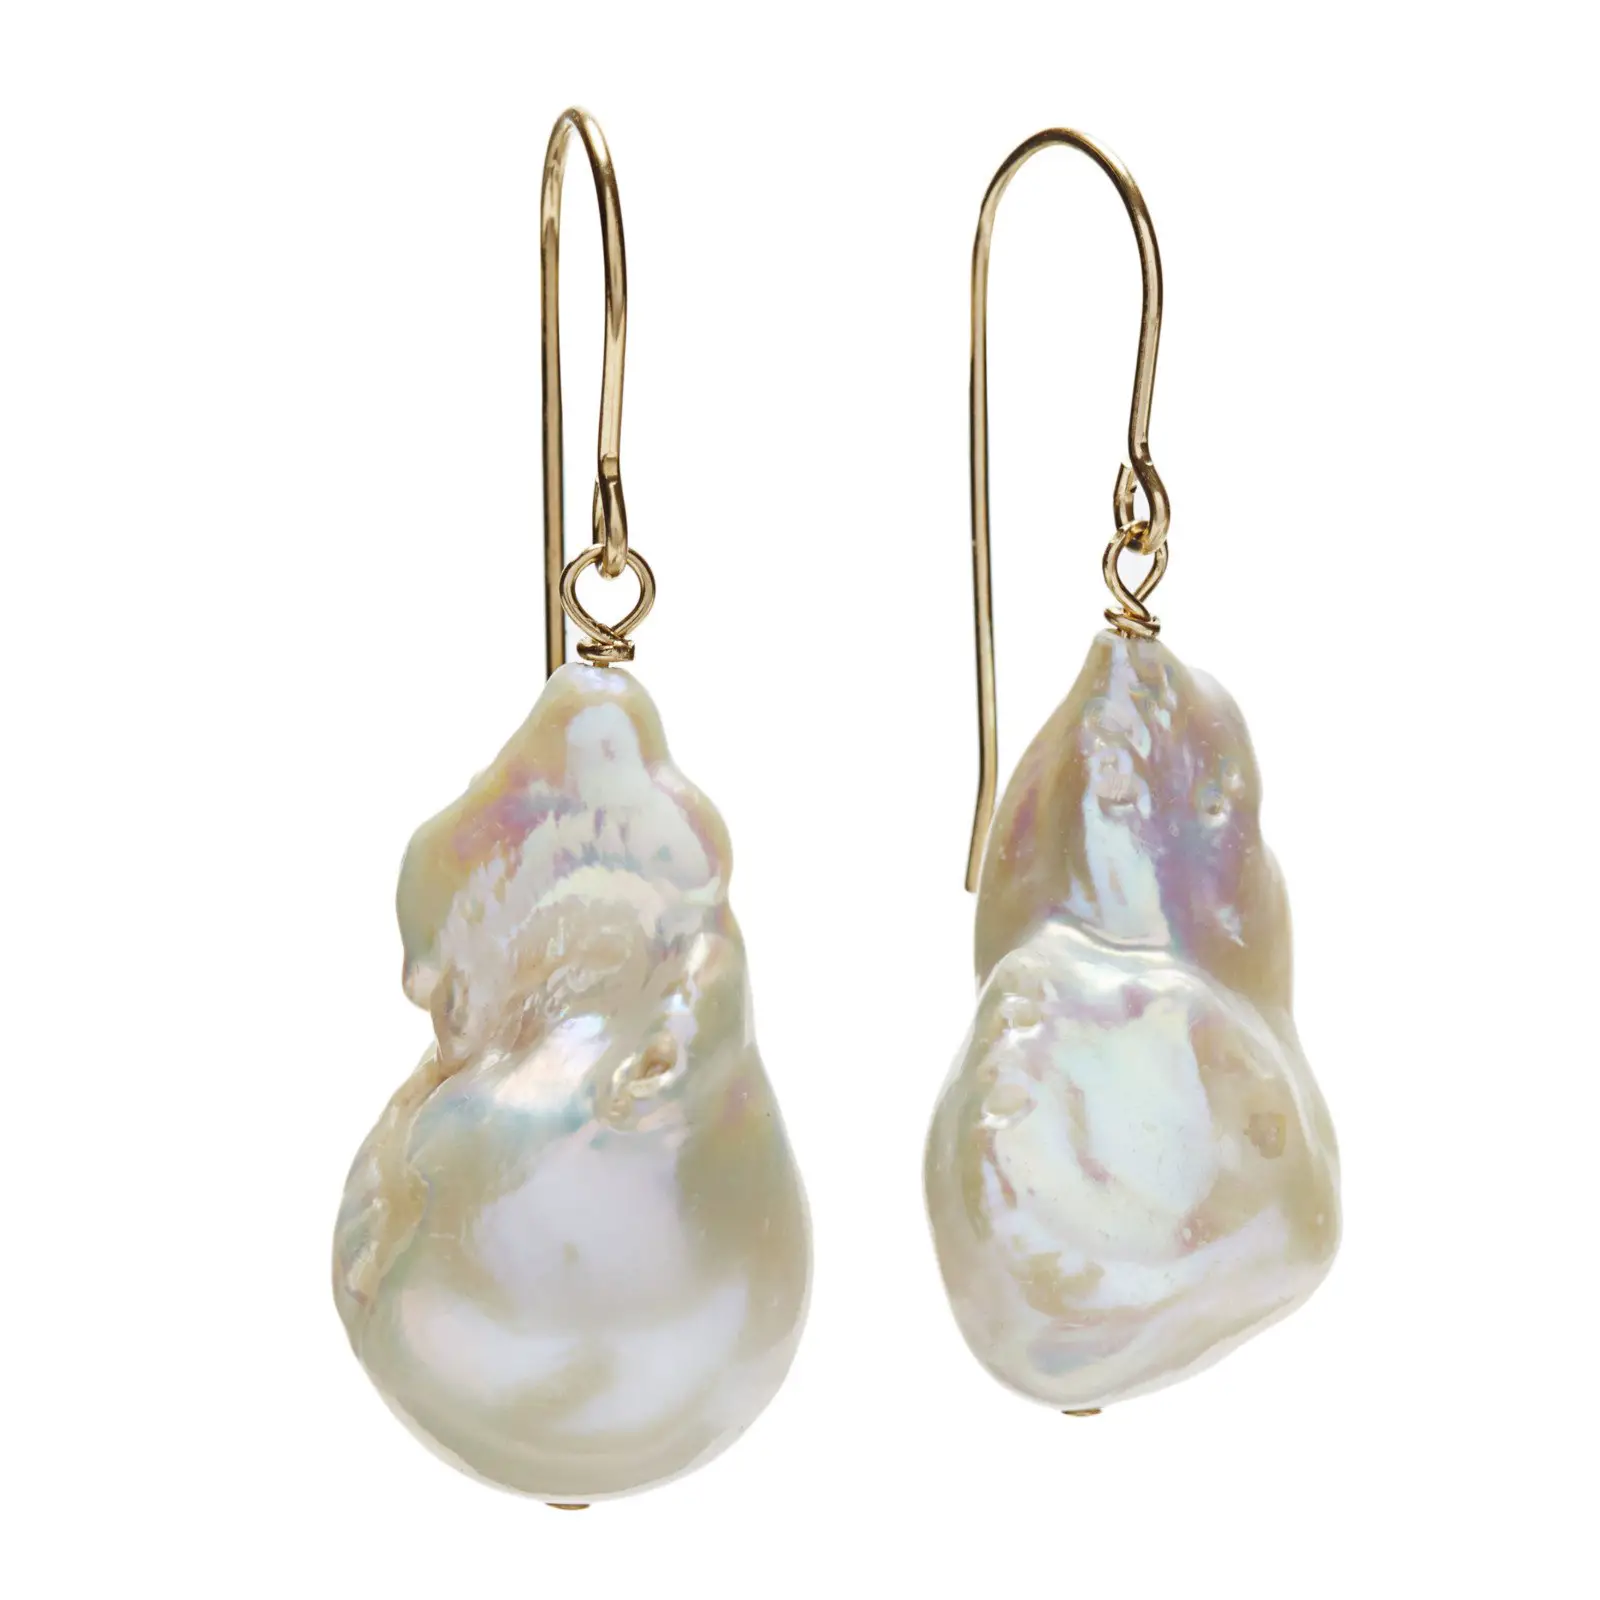 The Duchess of Cambridge wore In2Design Baroque pearl earrings